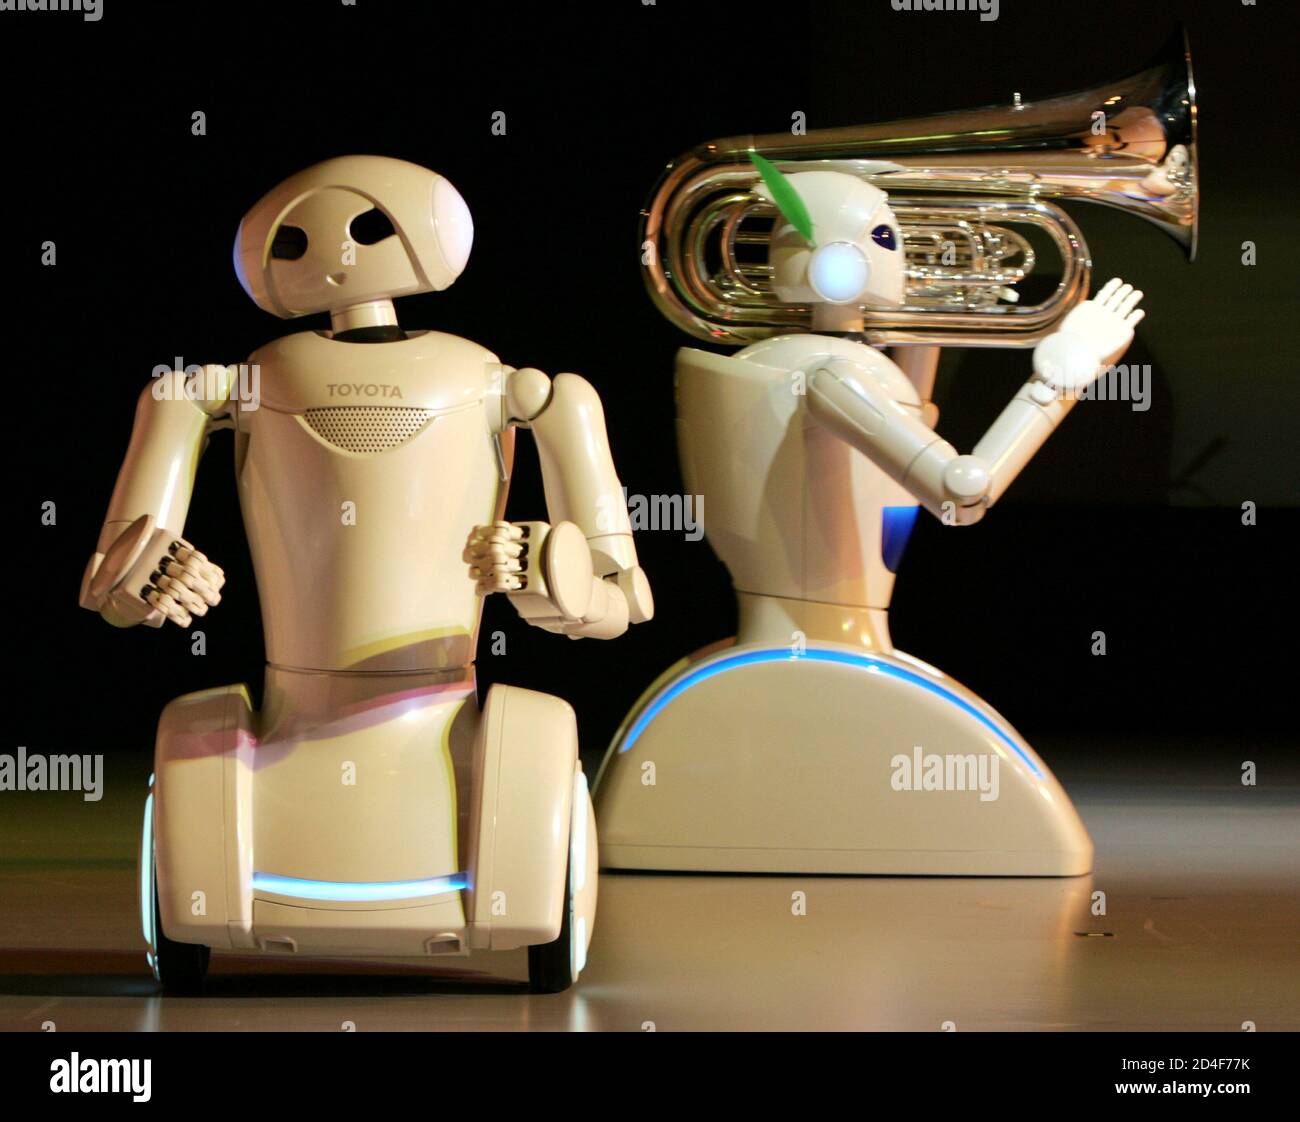 Robots Press High Resolution Stock Photography and Images - Alamy